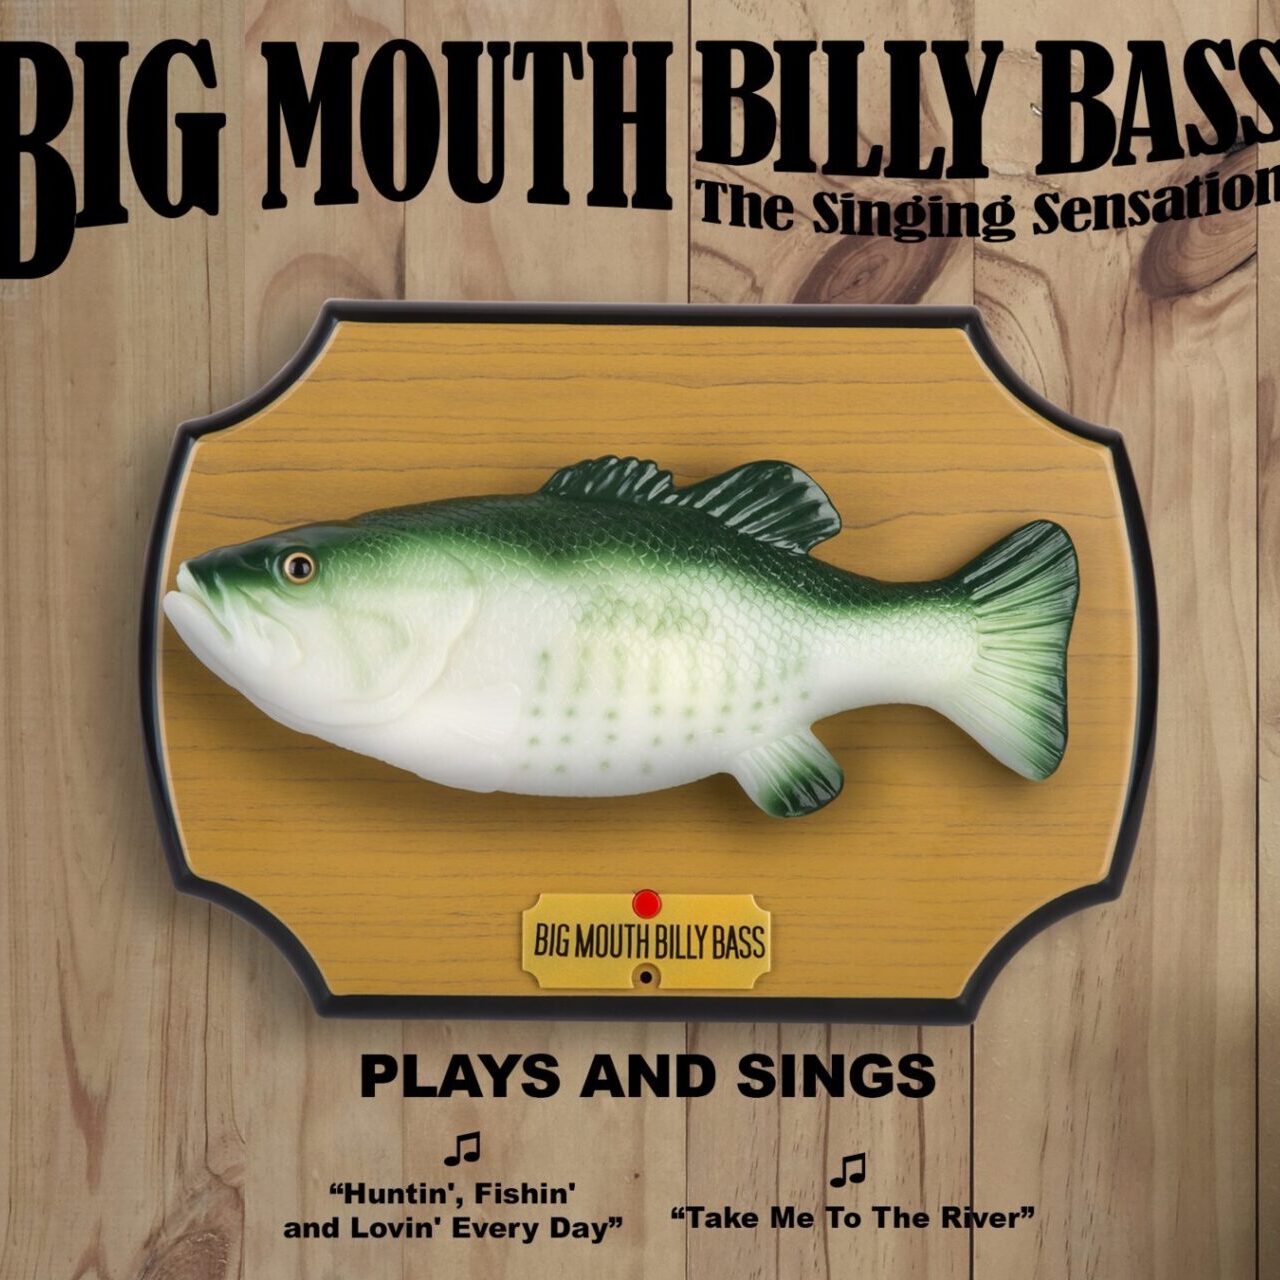 The Singing Sensation: Big Mouth Billy Bass is Back with a New